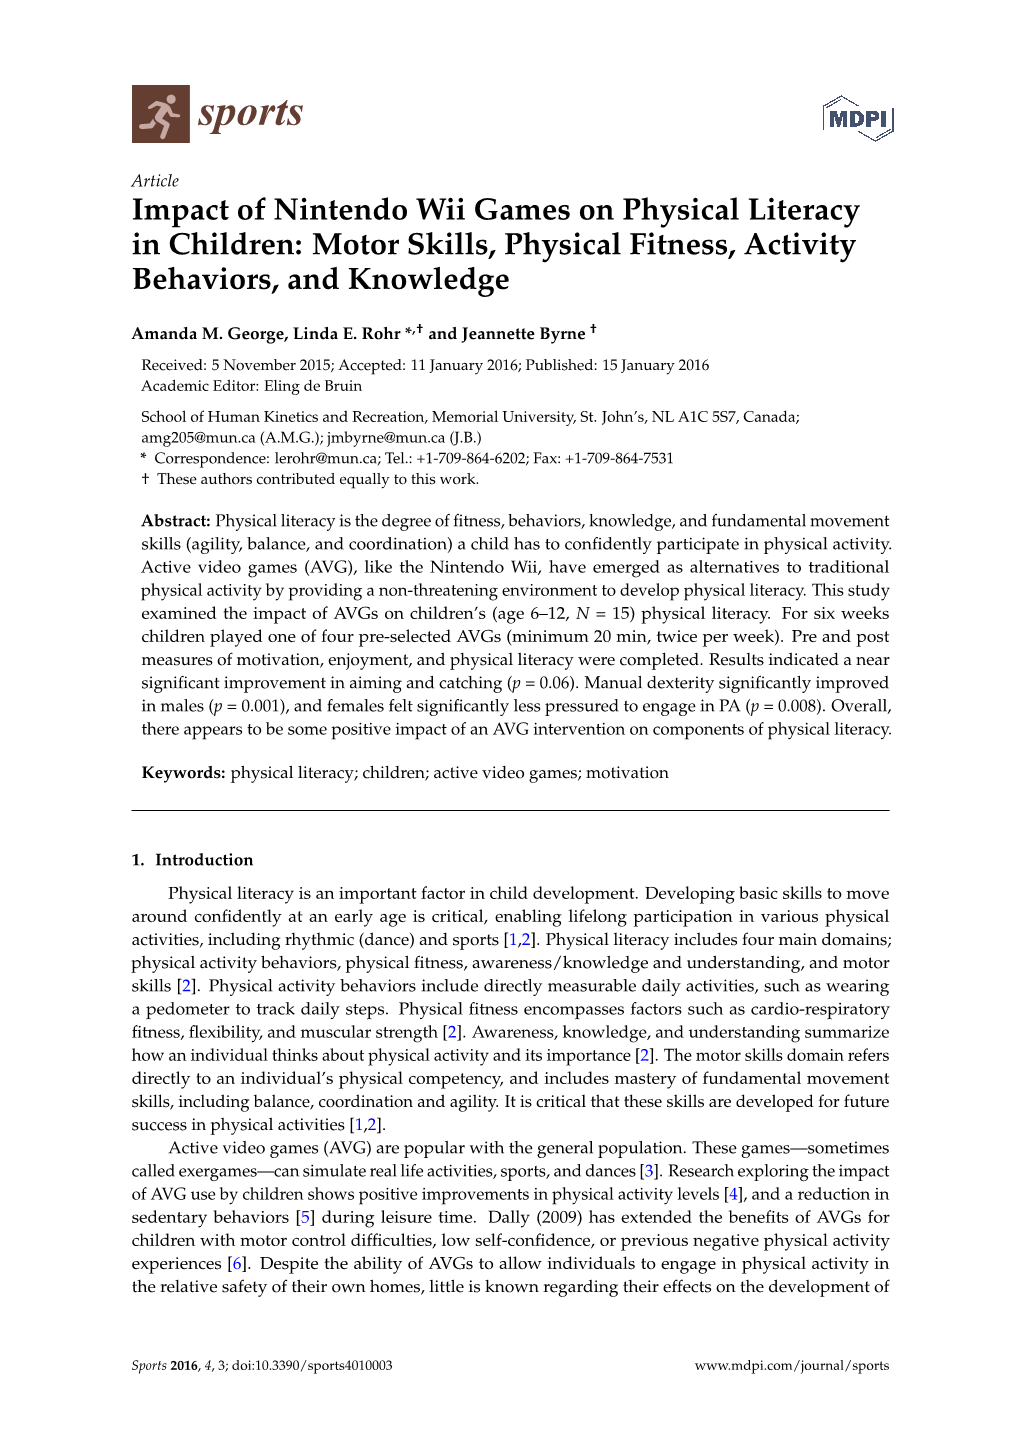 Impact of Nintendo Wii Games on Physical Literacy in Children: Motor Skills, Physical Fitness, Activity Behaviors, and Knowledge